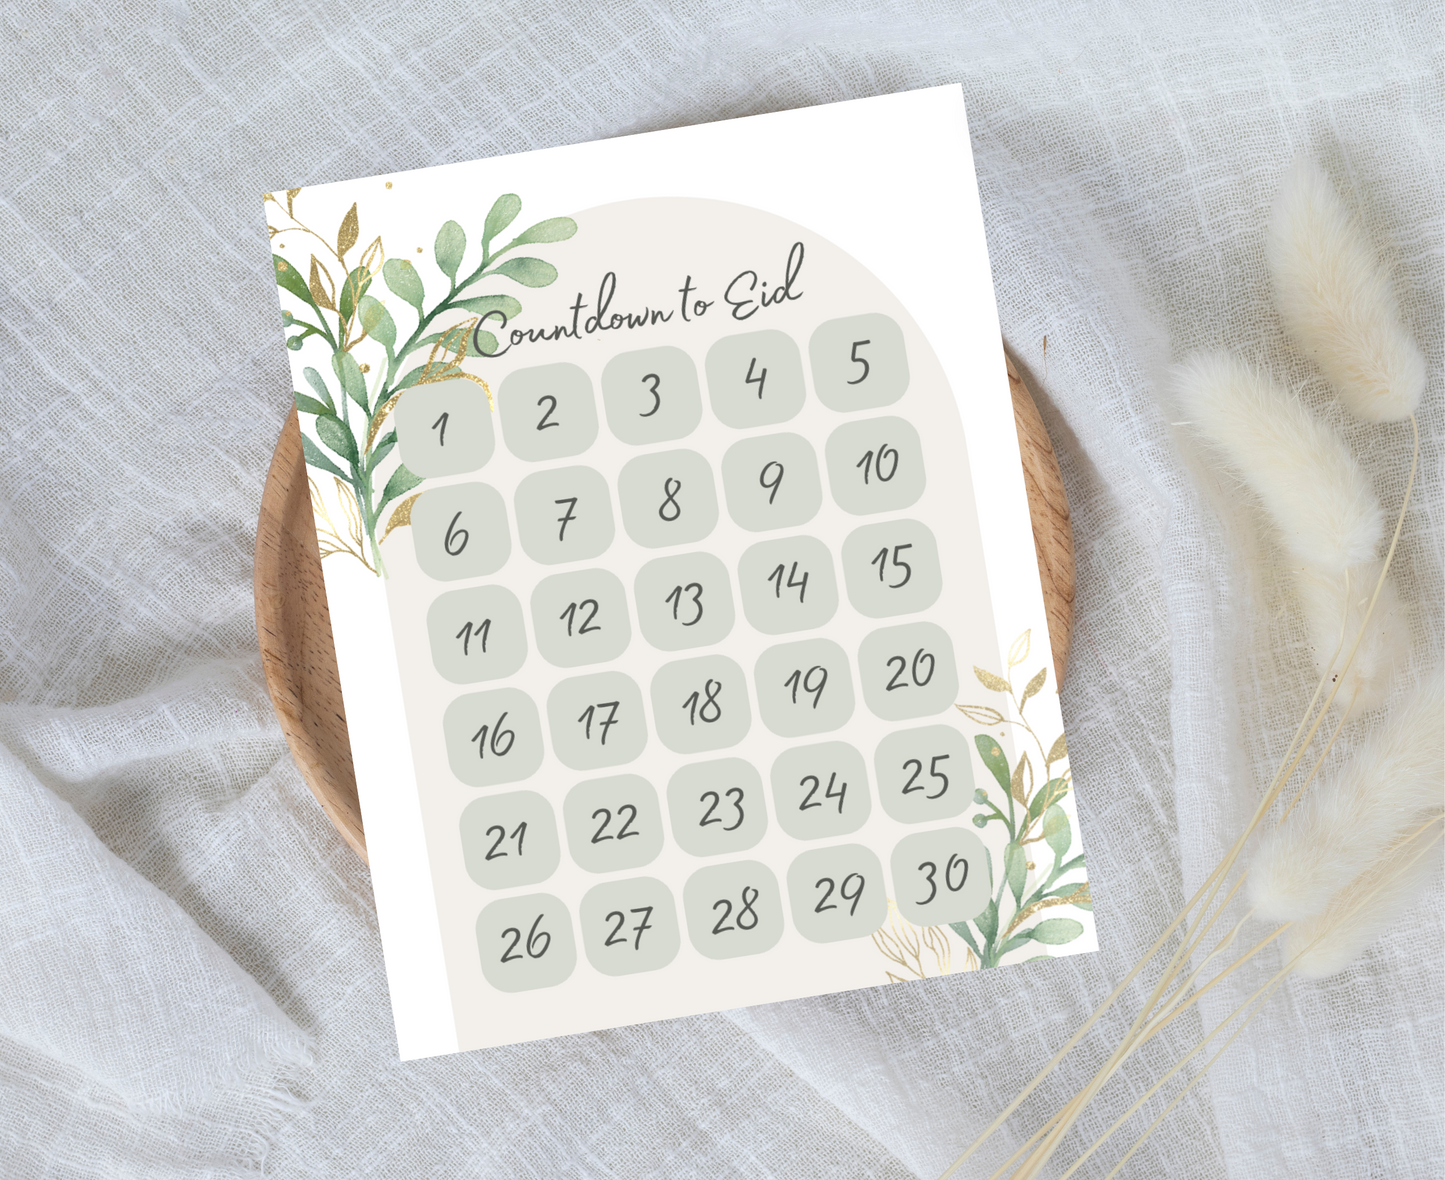  Countdown to Eid print on a neutral cloth background and round wooden tray. 